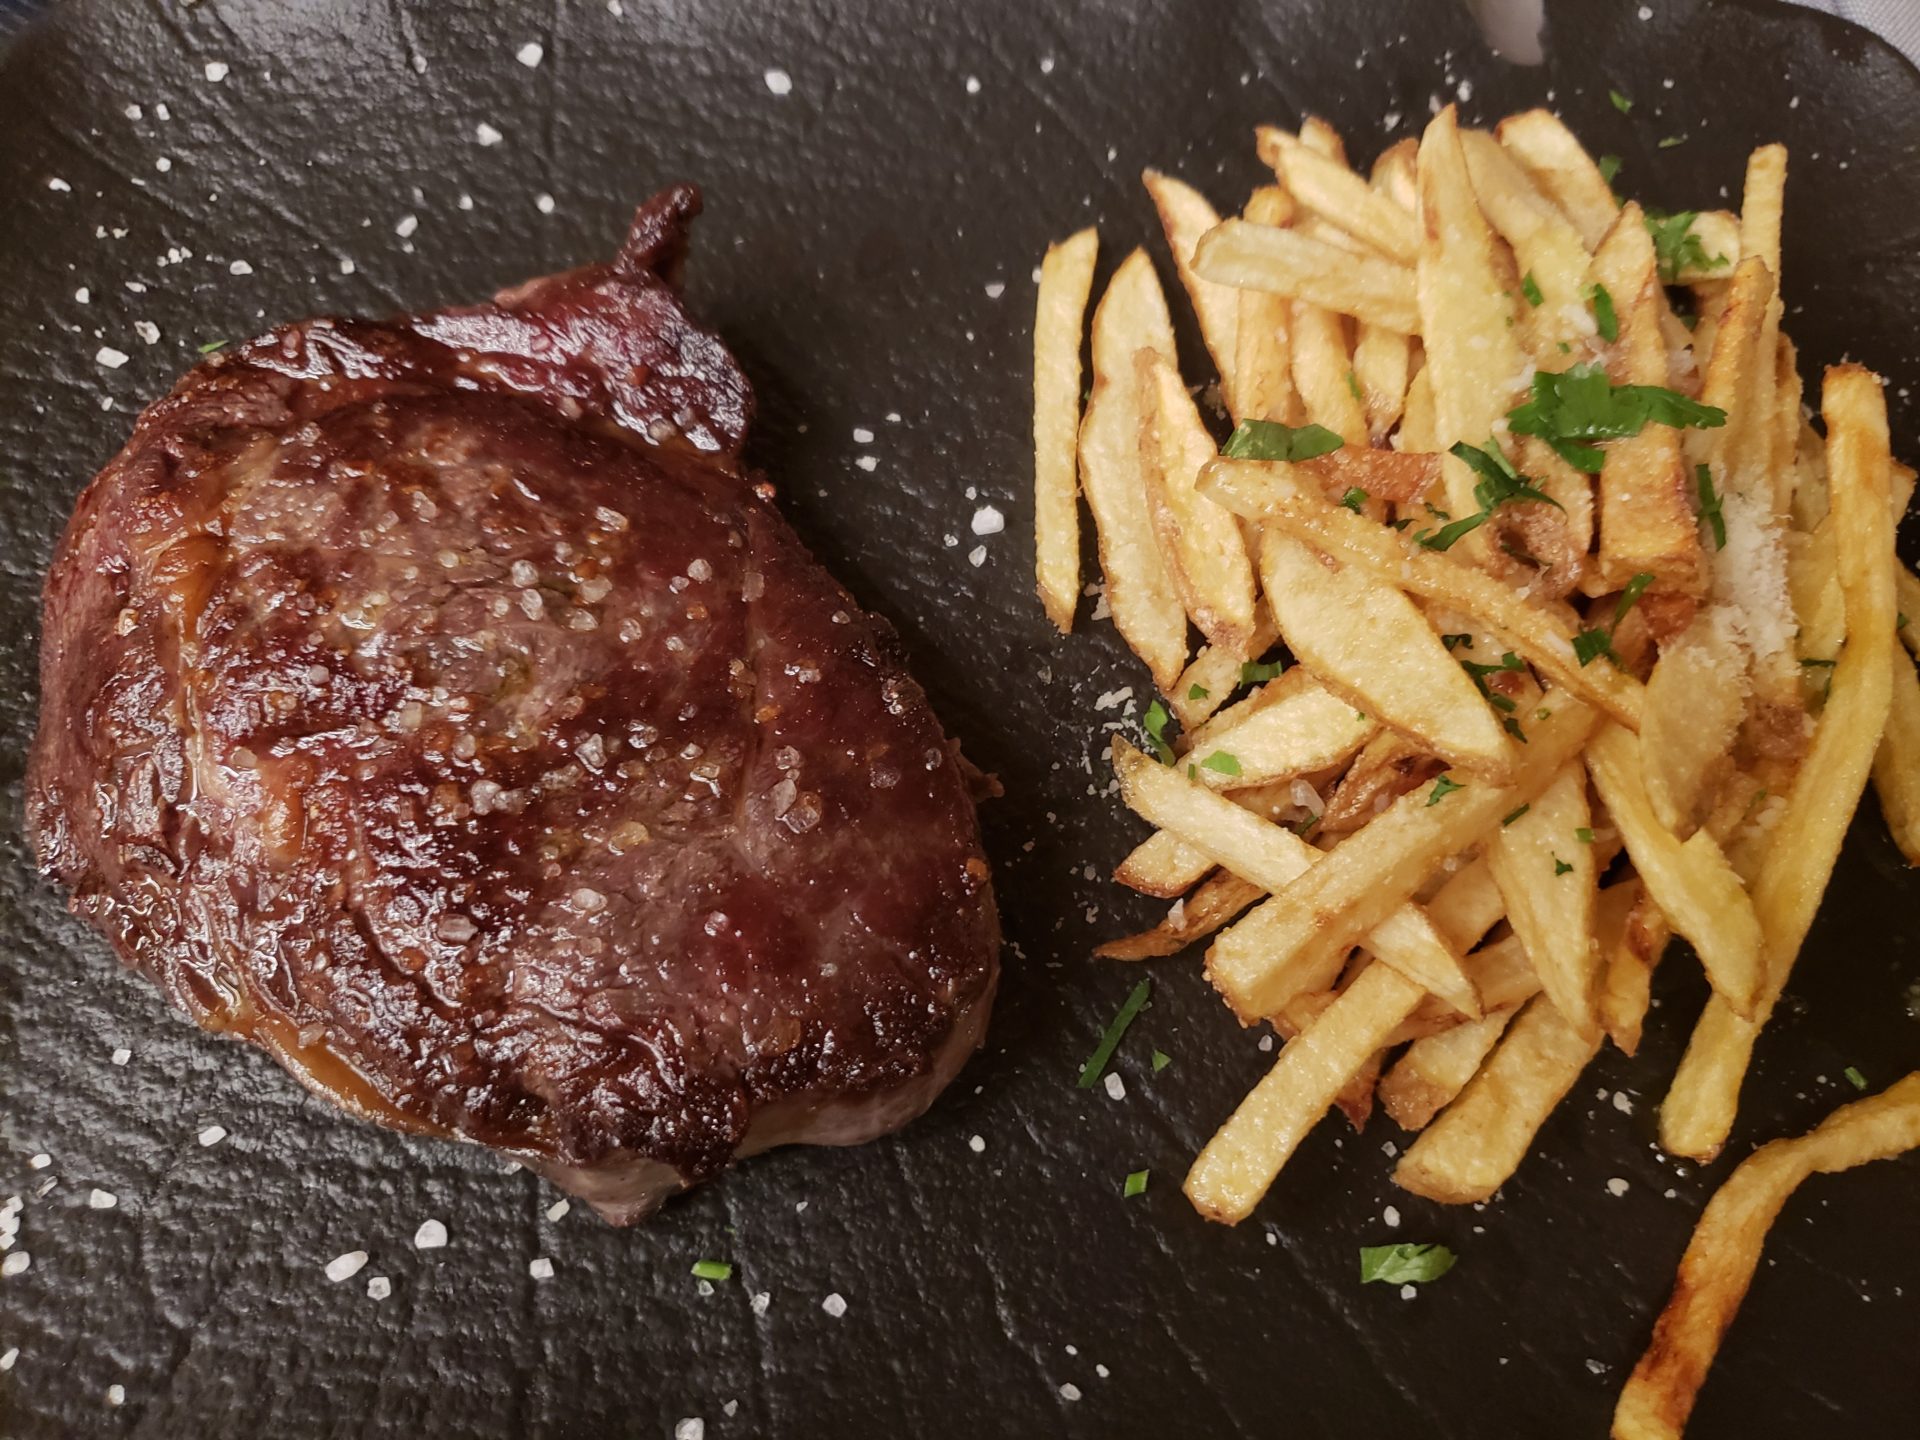 a steak and french fries on a black surface